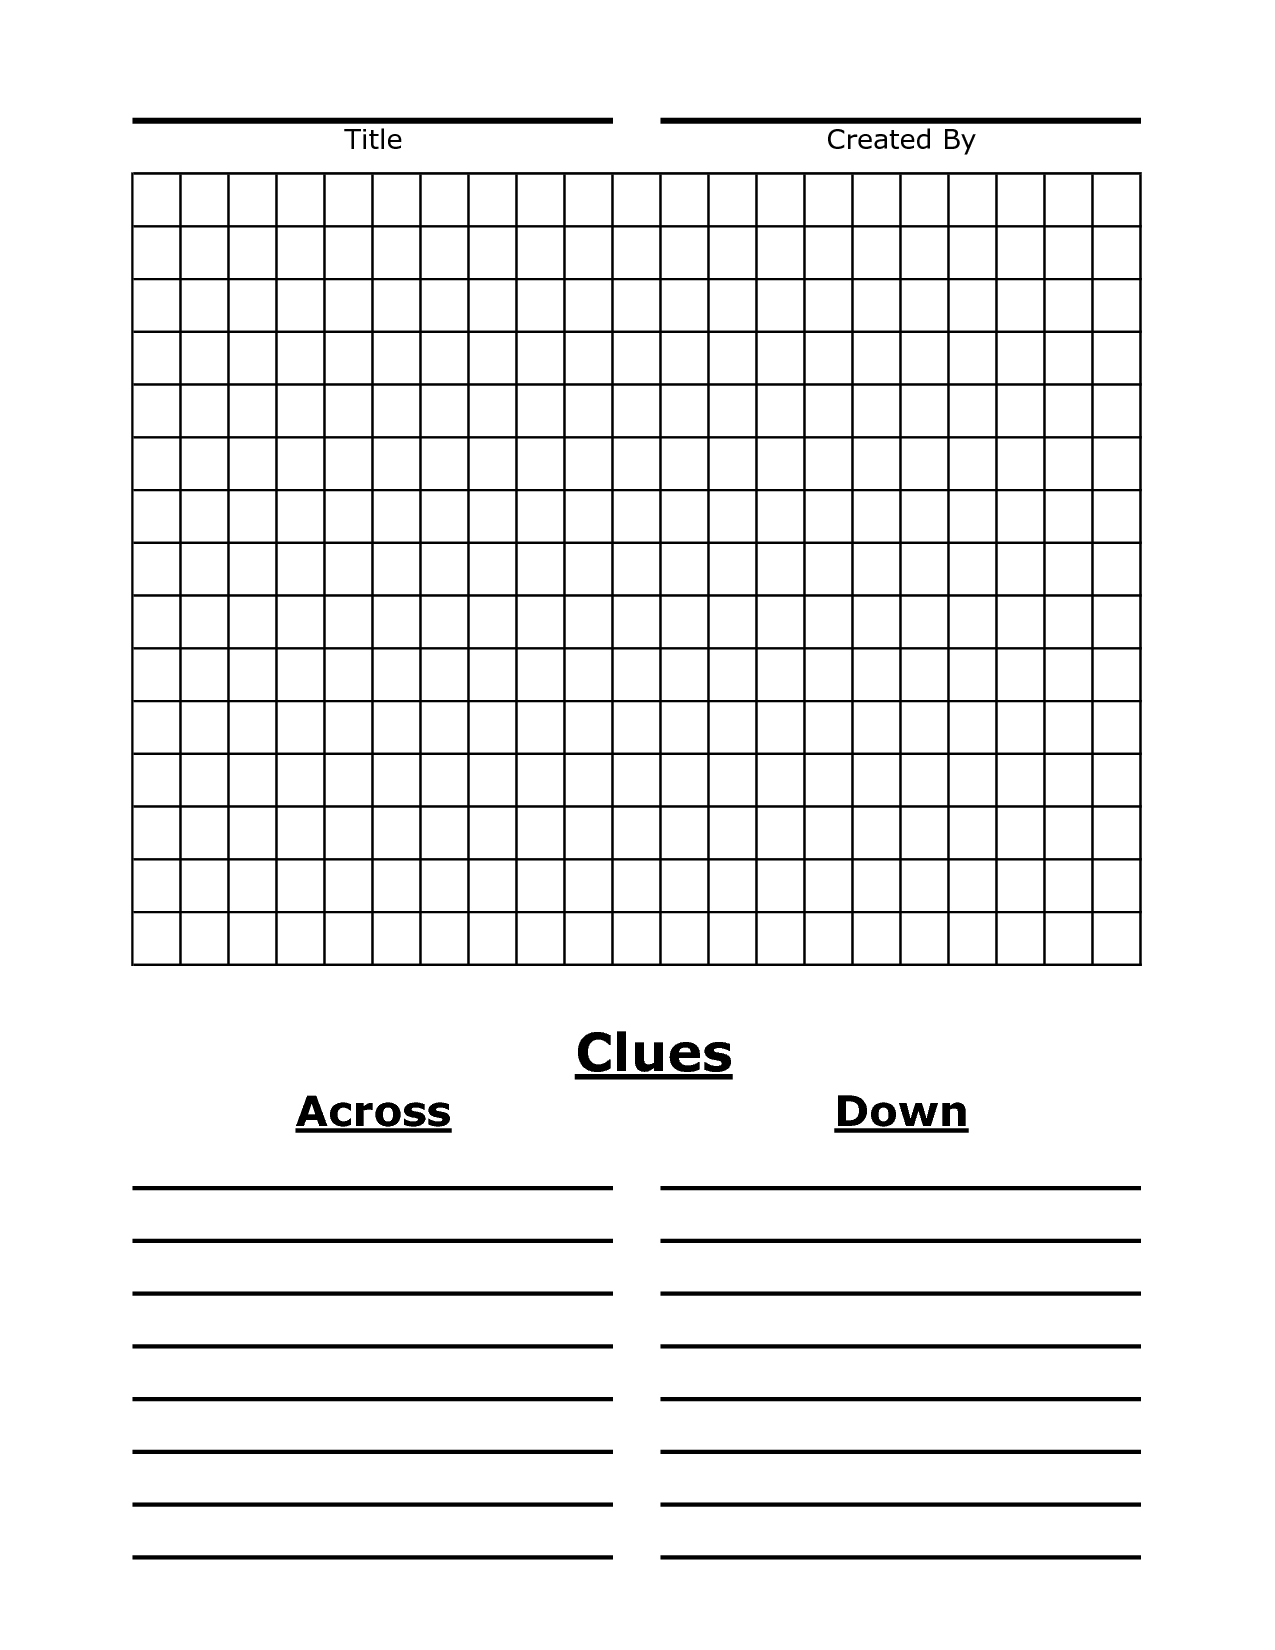 Blank Crossword Puzzle, Buy Now, Shop, 10% OFF, www.chocomuseo.com